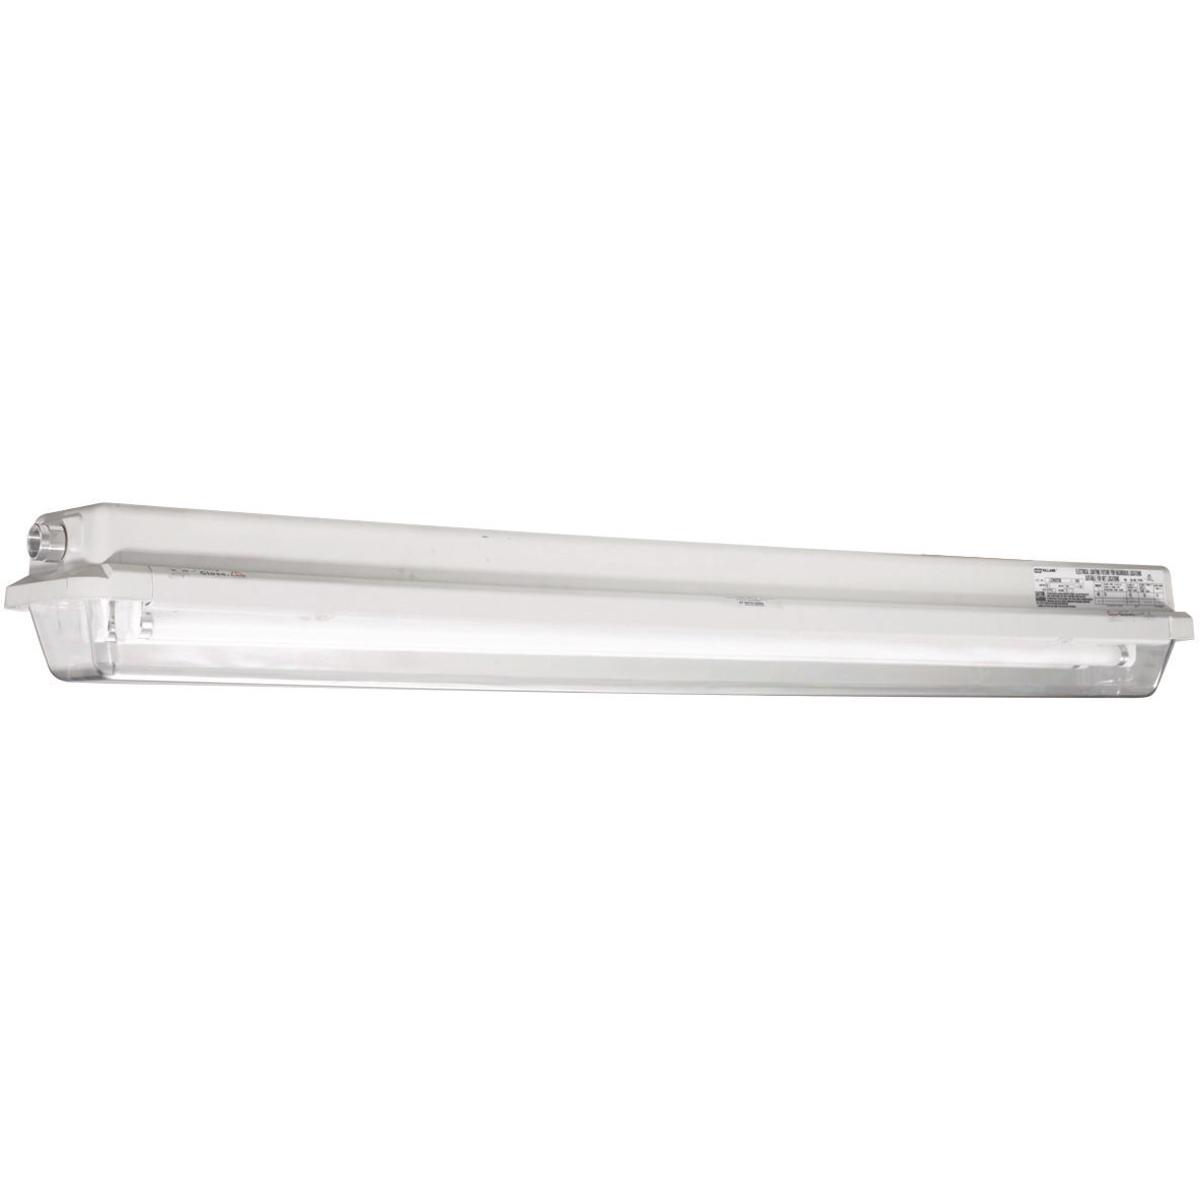 Hubbell LZ2N60201 LZ2N Series- 60W 120V - 4' 2-Lamp  ; Lexan® Clear Lens, impact resistant polycarbonate ; Housing-one piece fiberglass reinforced polyester, NEMA 4X & IP66 rated. ; Two 3/4” NTP aluminum hubs - one at each end (includes one 3/4” close-up plug and two 3/4” 